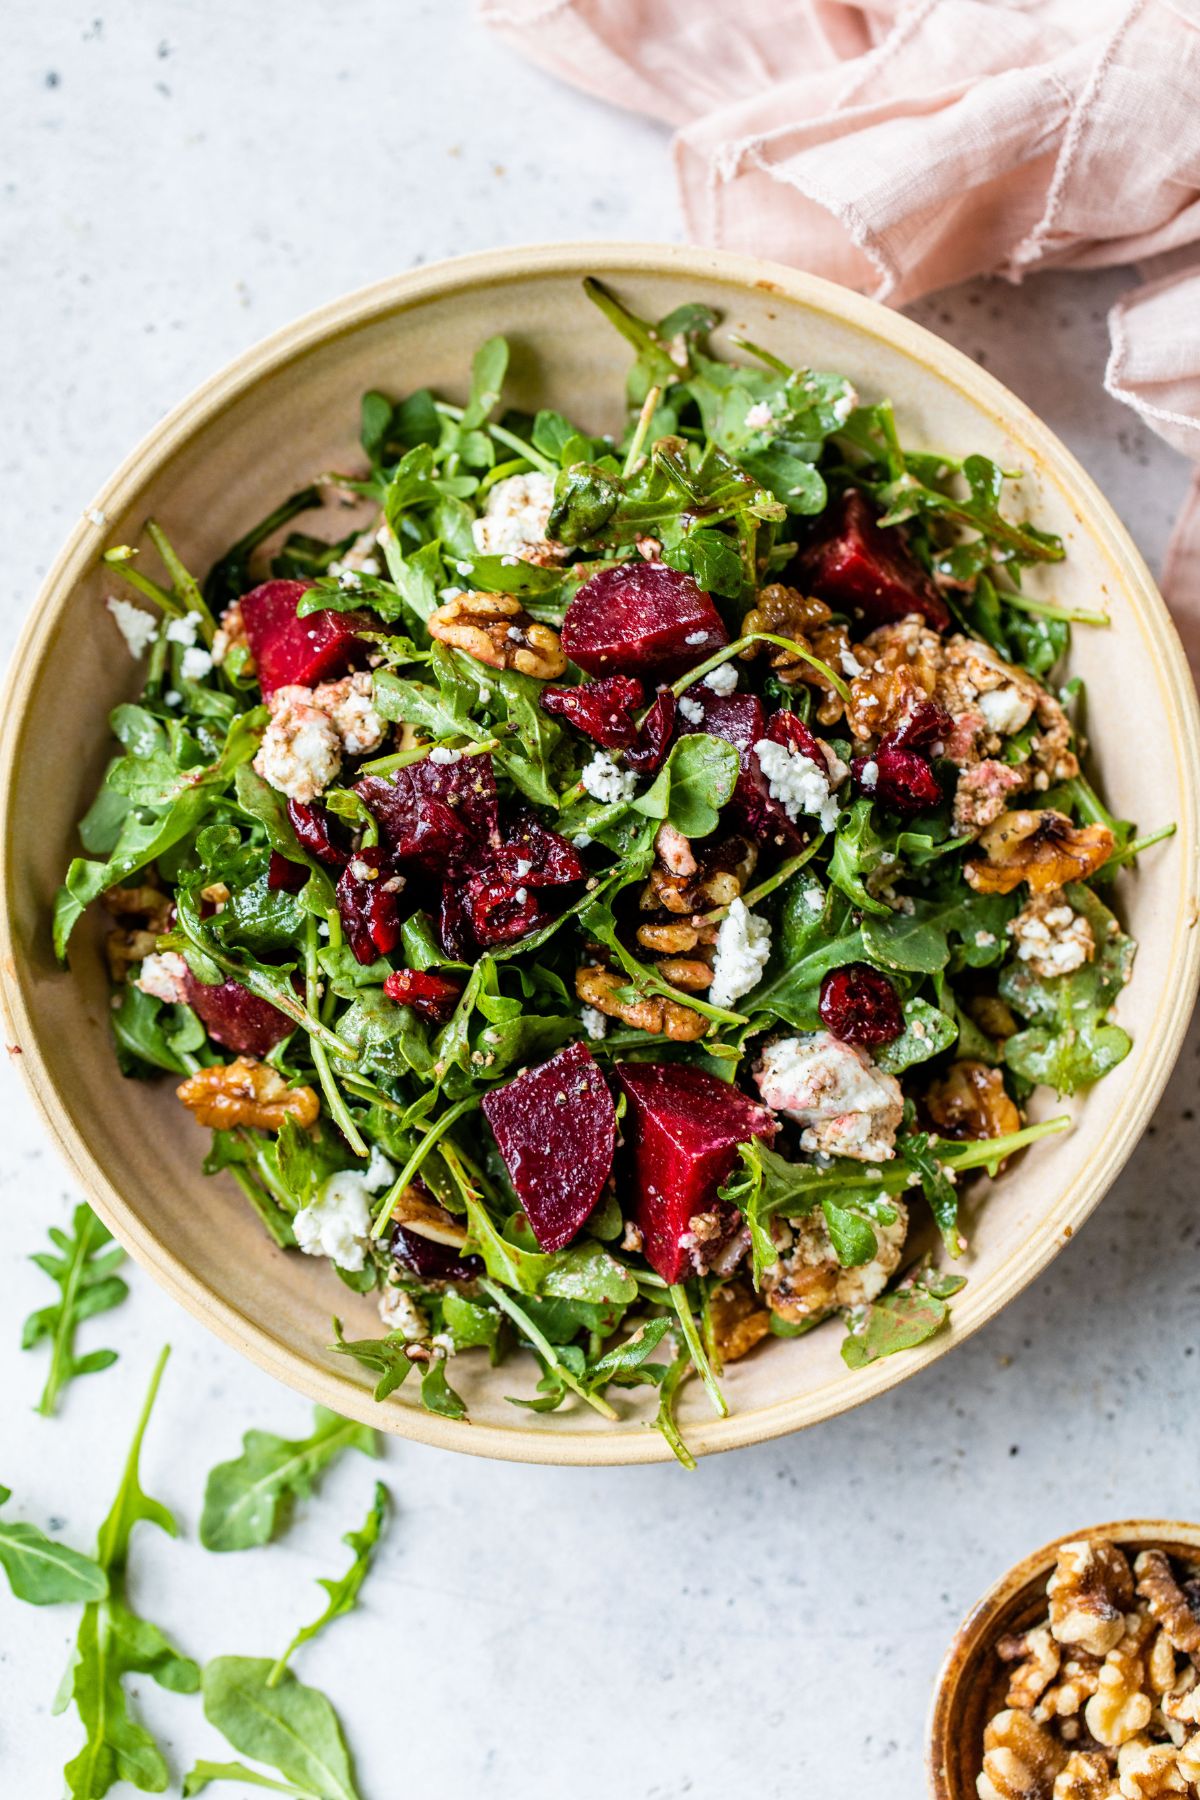 Arugula salad with steamed beets and goat cheese in a bowl.